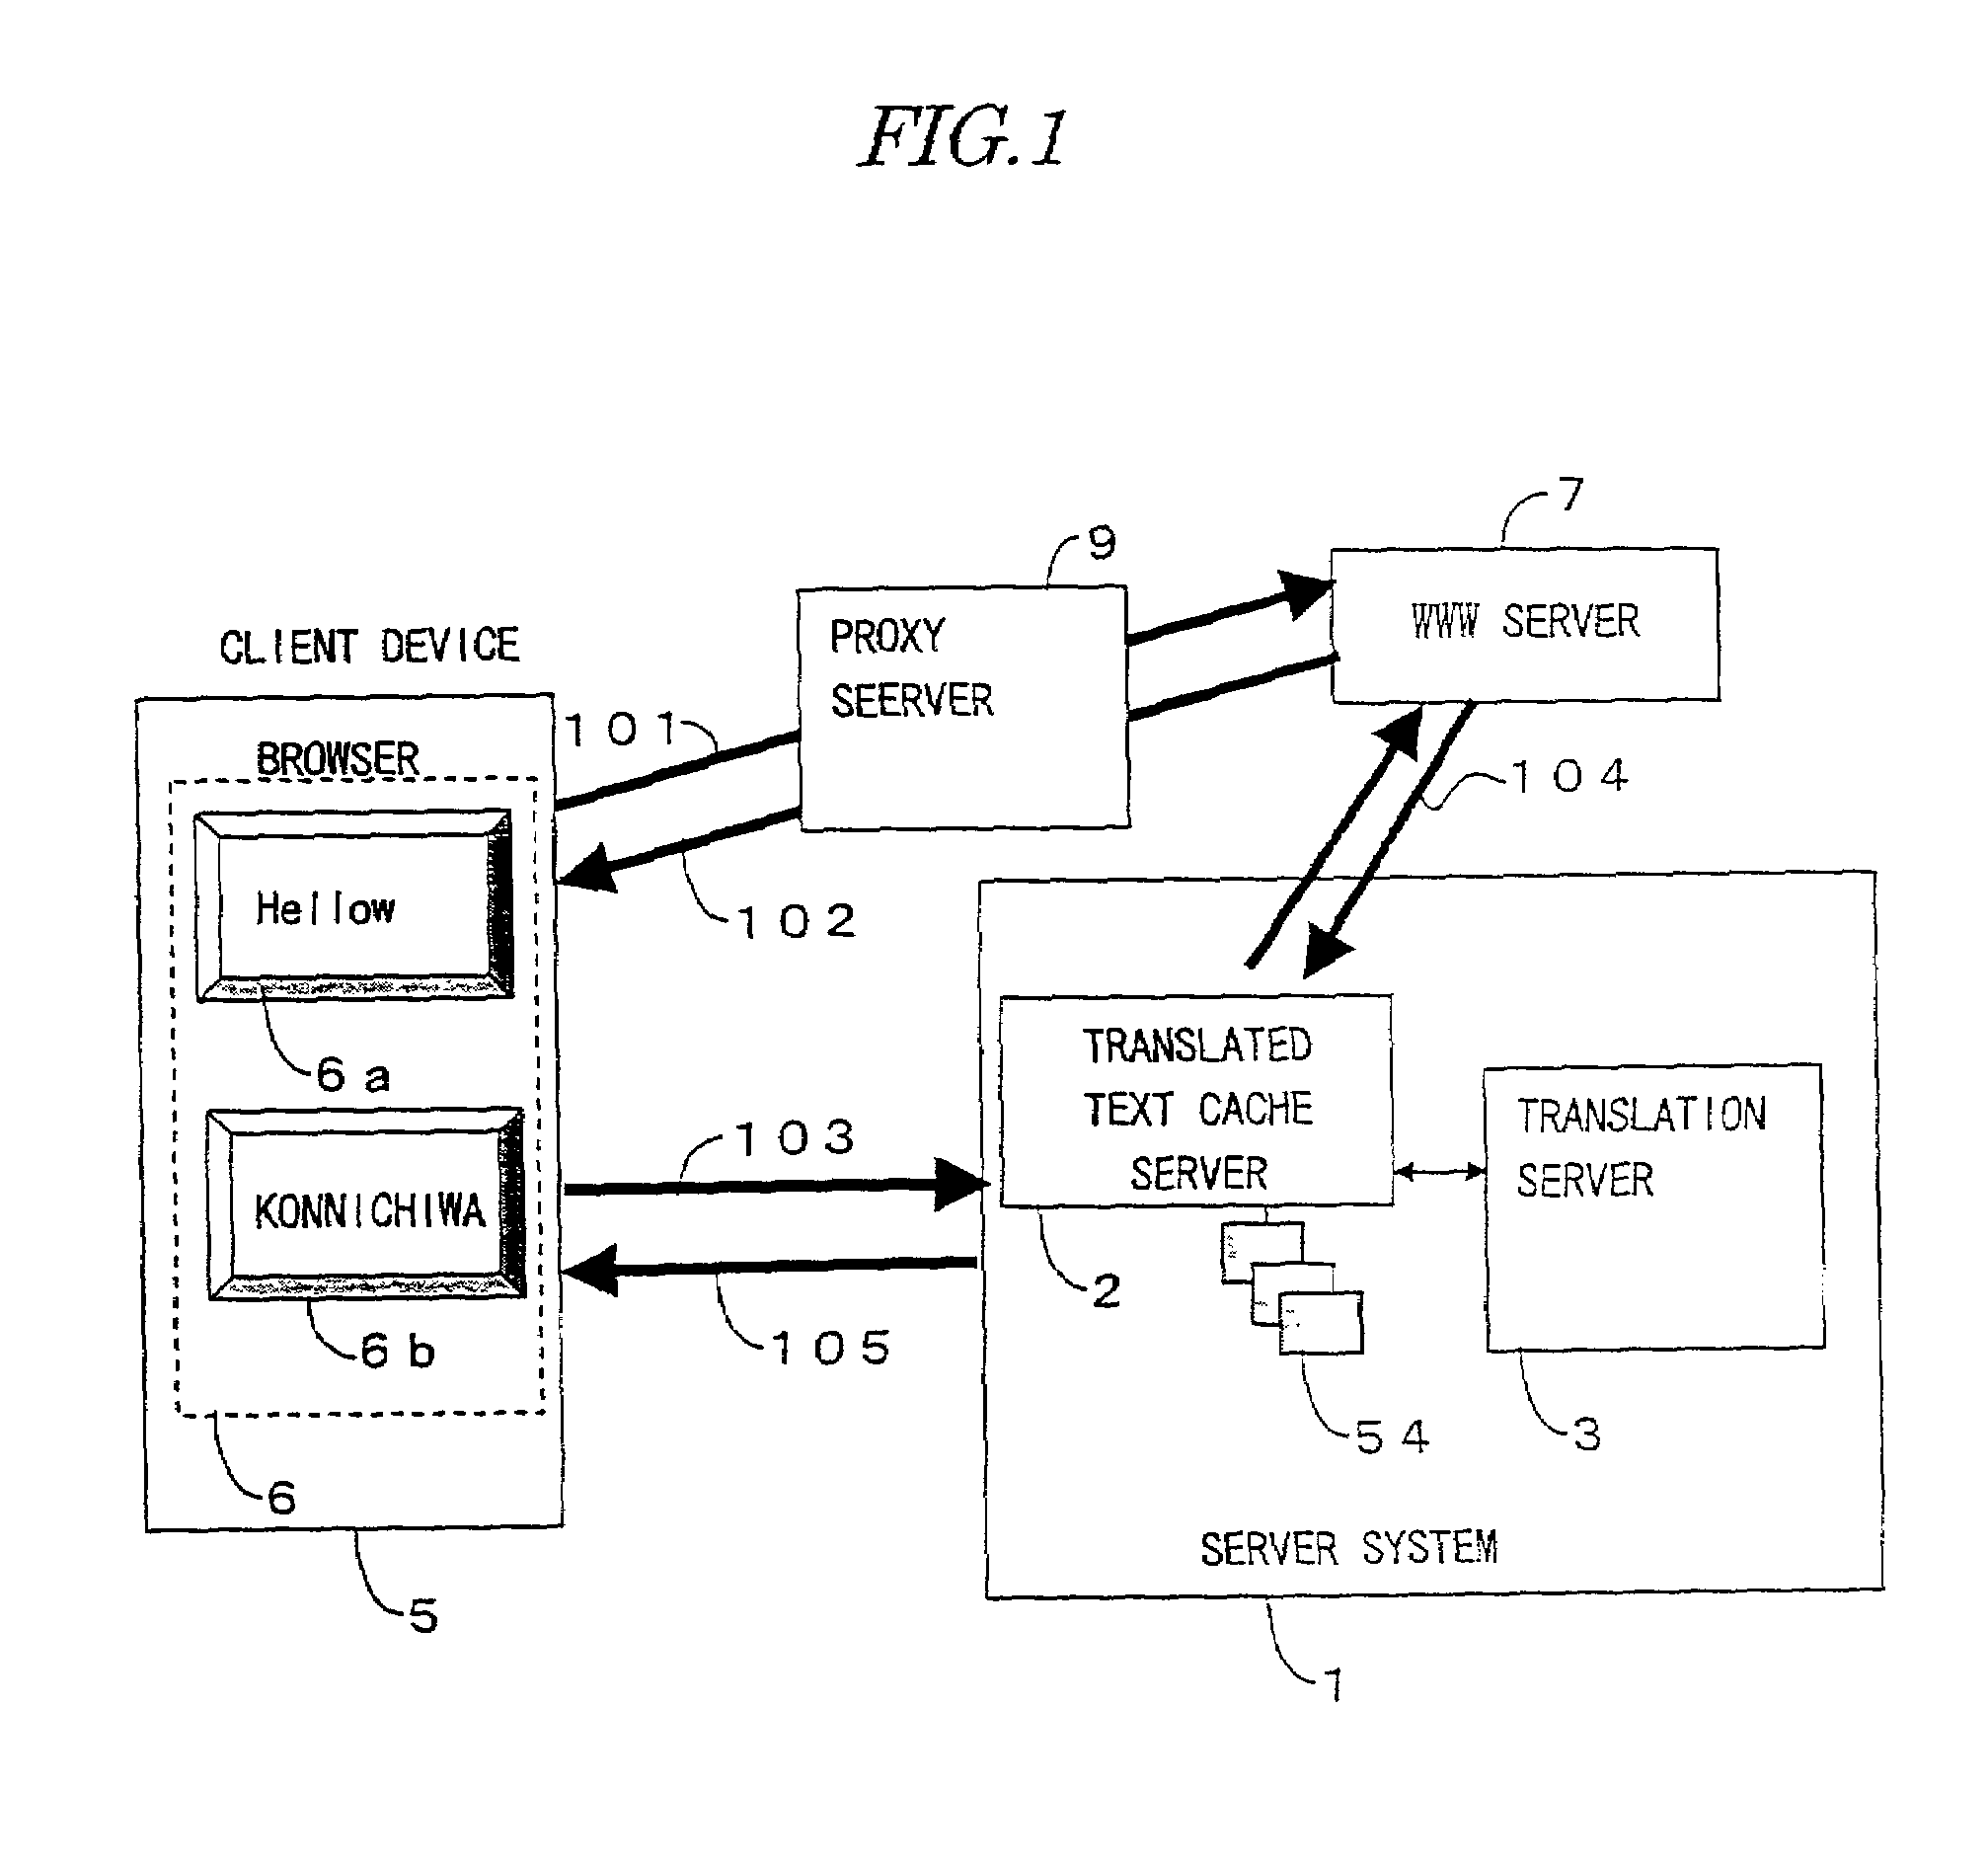 Relay device, server device, terminal device, and translation server system utilizing these devices